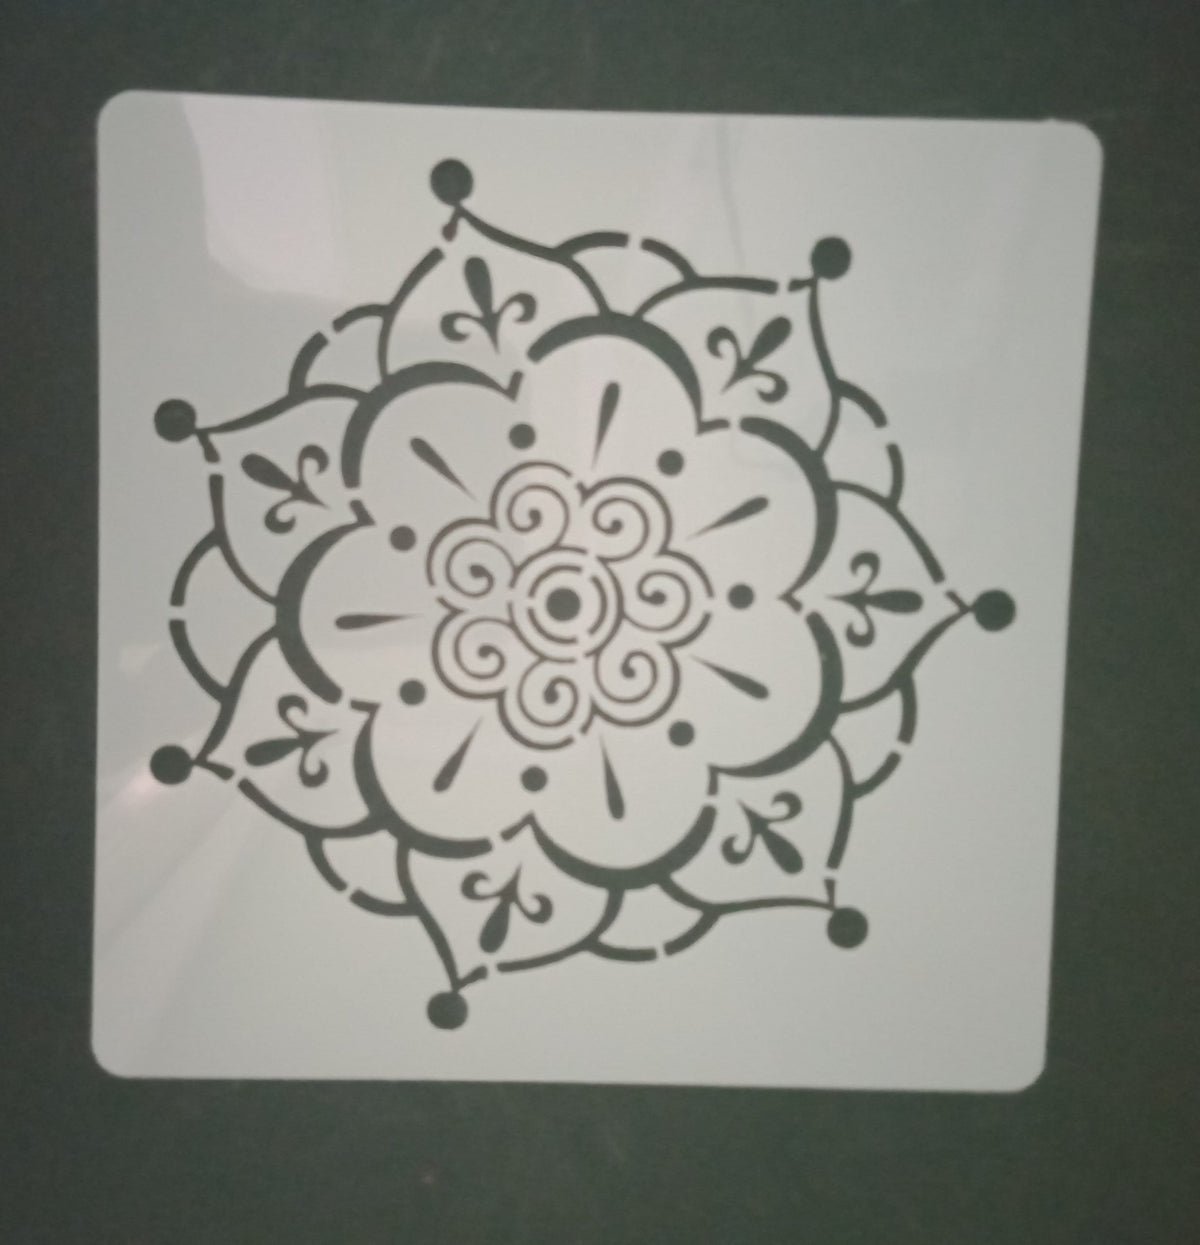 Stencil for art and craft - Mandala Art - Size 5*5 inch - 1 Pc.